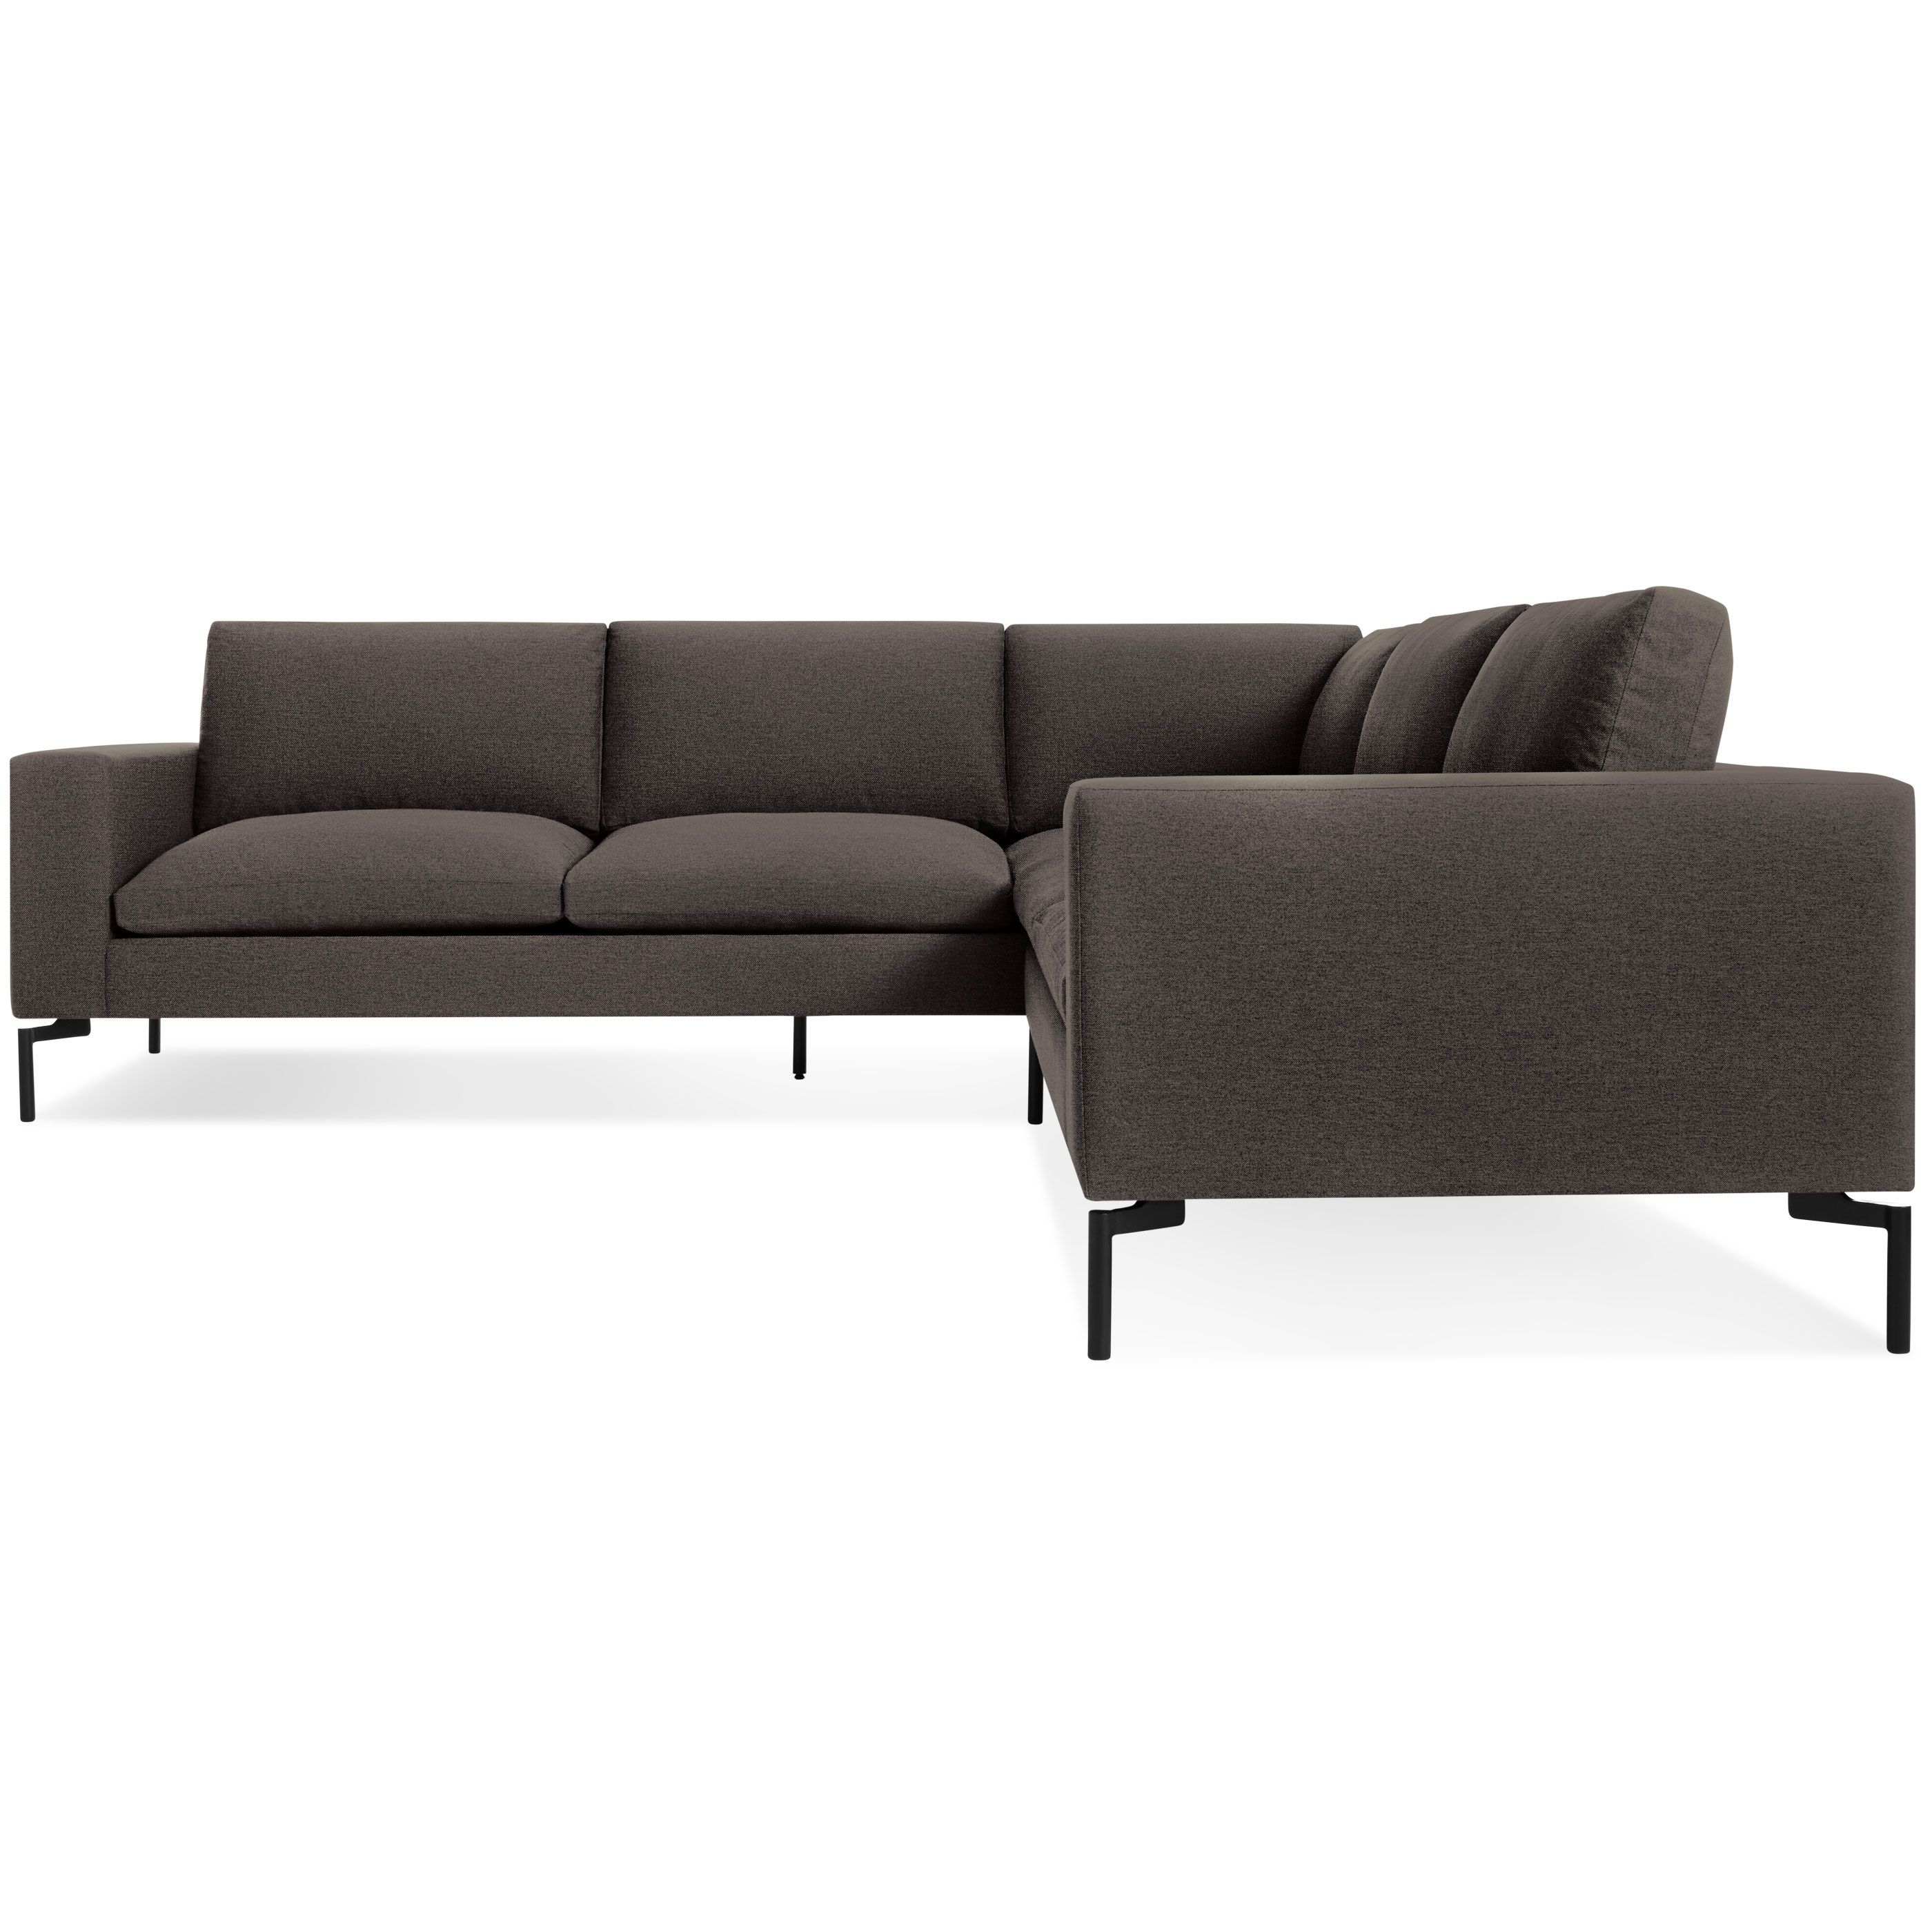 Blu Dot Within Most Popular Newfoundland Sectional Sofas (View 2 of 15)